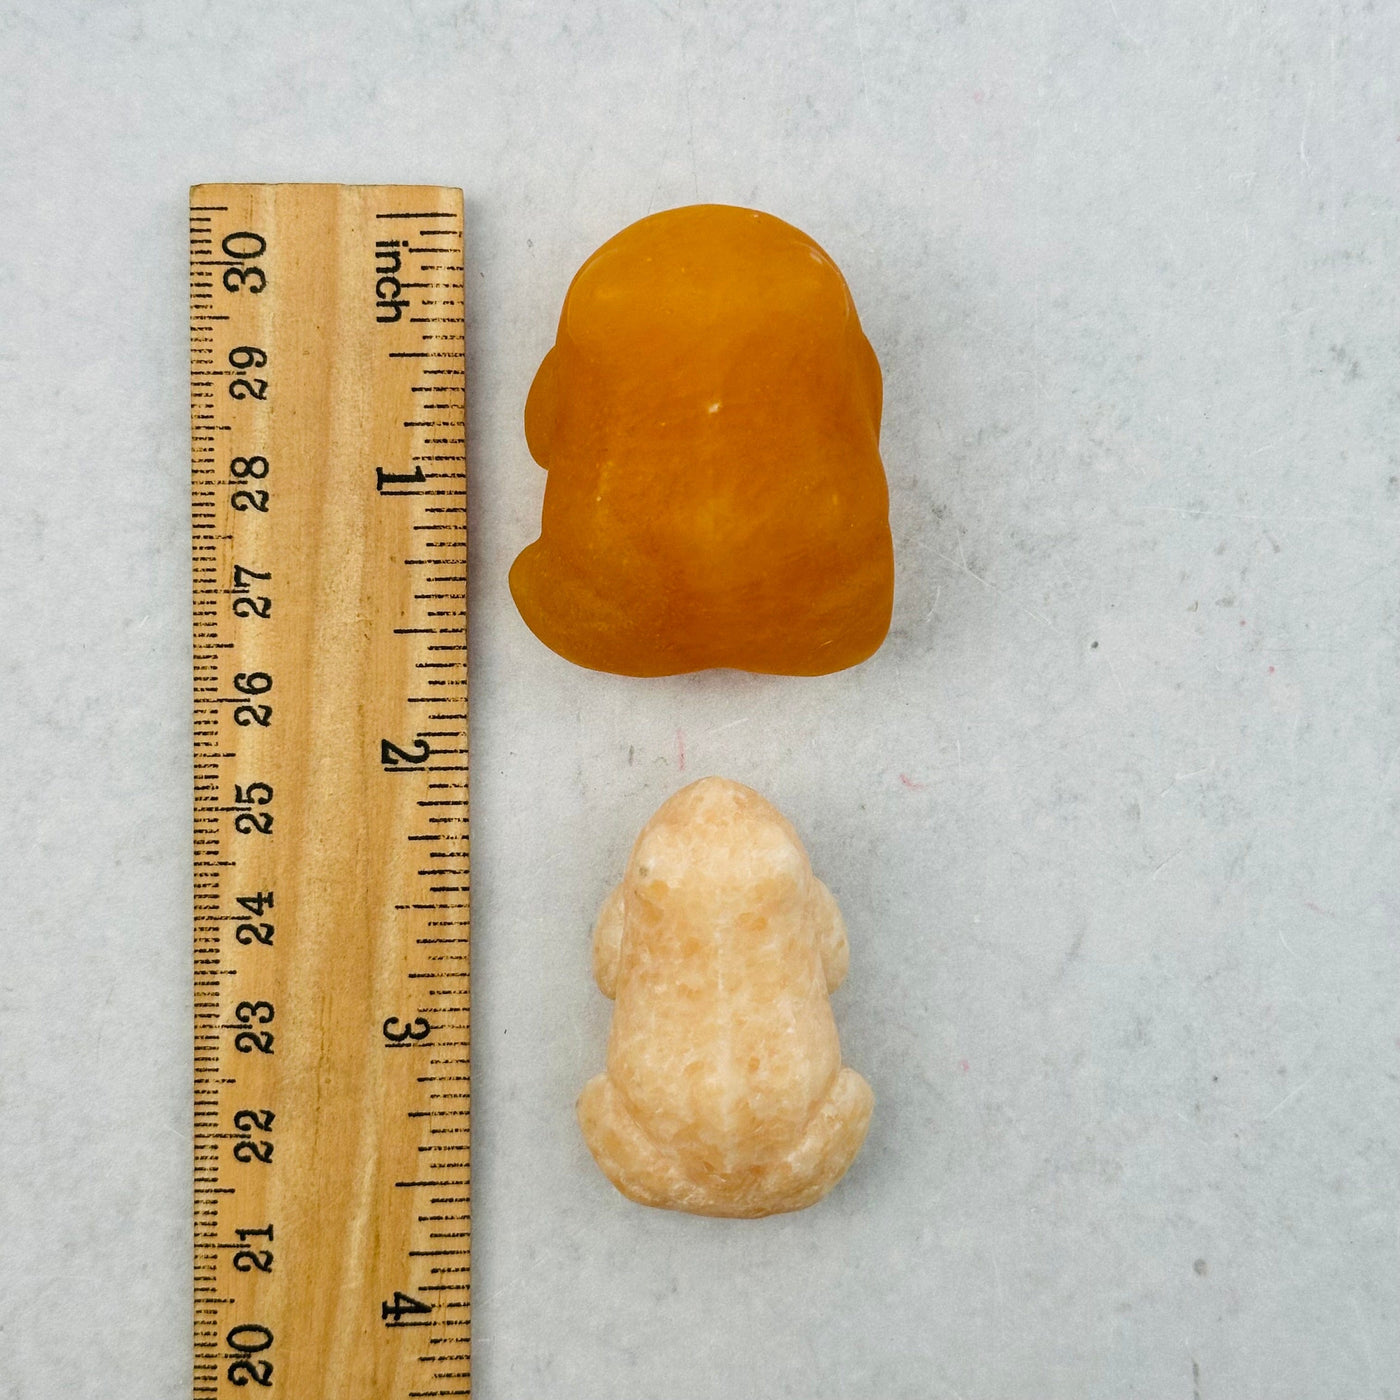 gemstone frog next to a ruler for size reference 